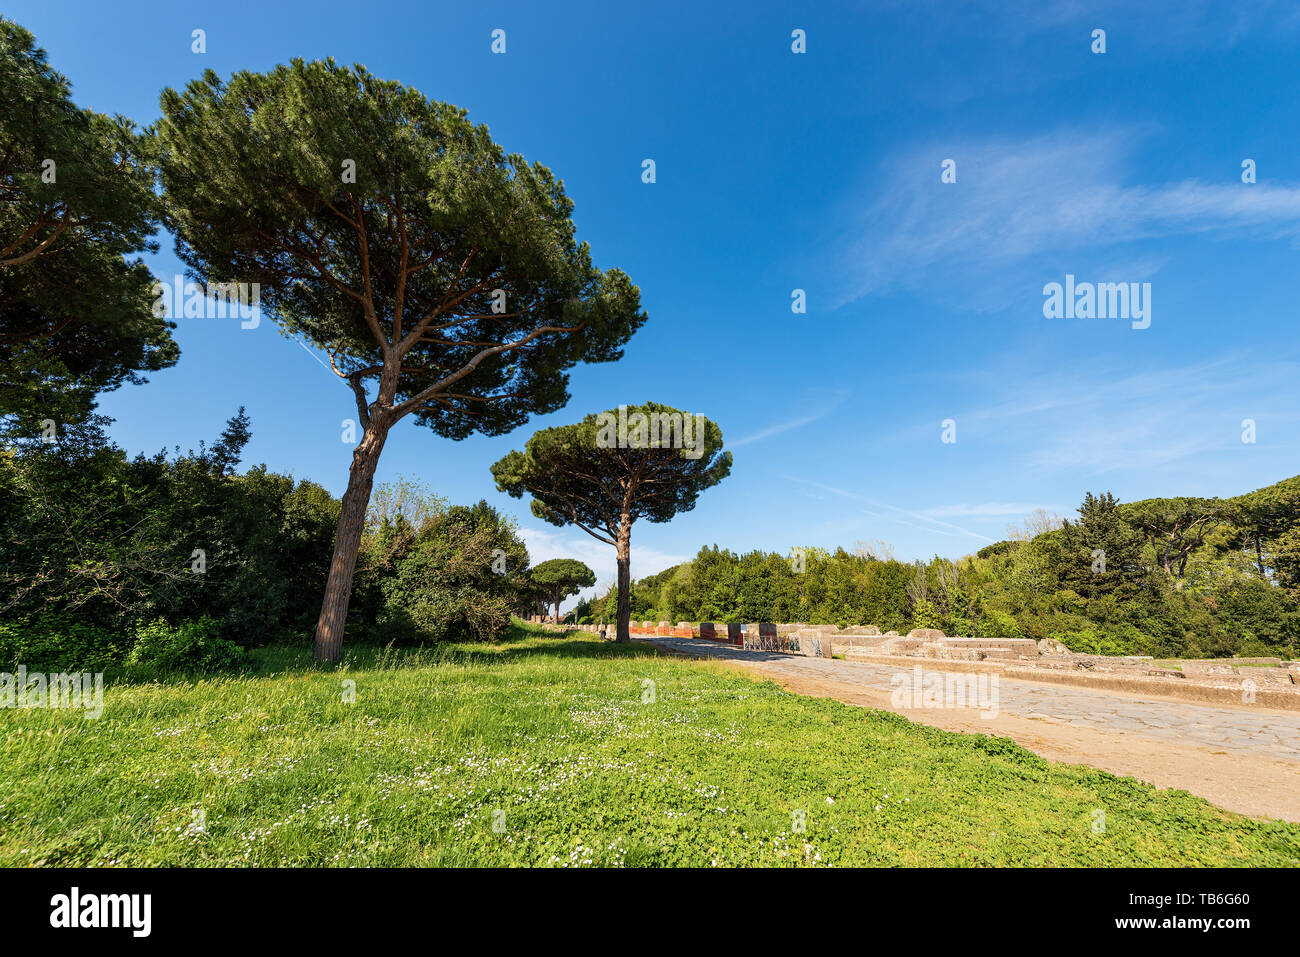 Decumanus Maximus, ancient Roman road in Ostia Antica, colony founded in the 7th century BC. Archeological siteÂ in Rome, UNESCO world heritage site.  Stock Photo